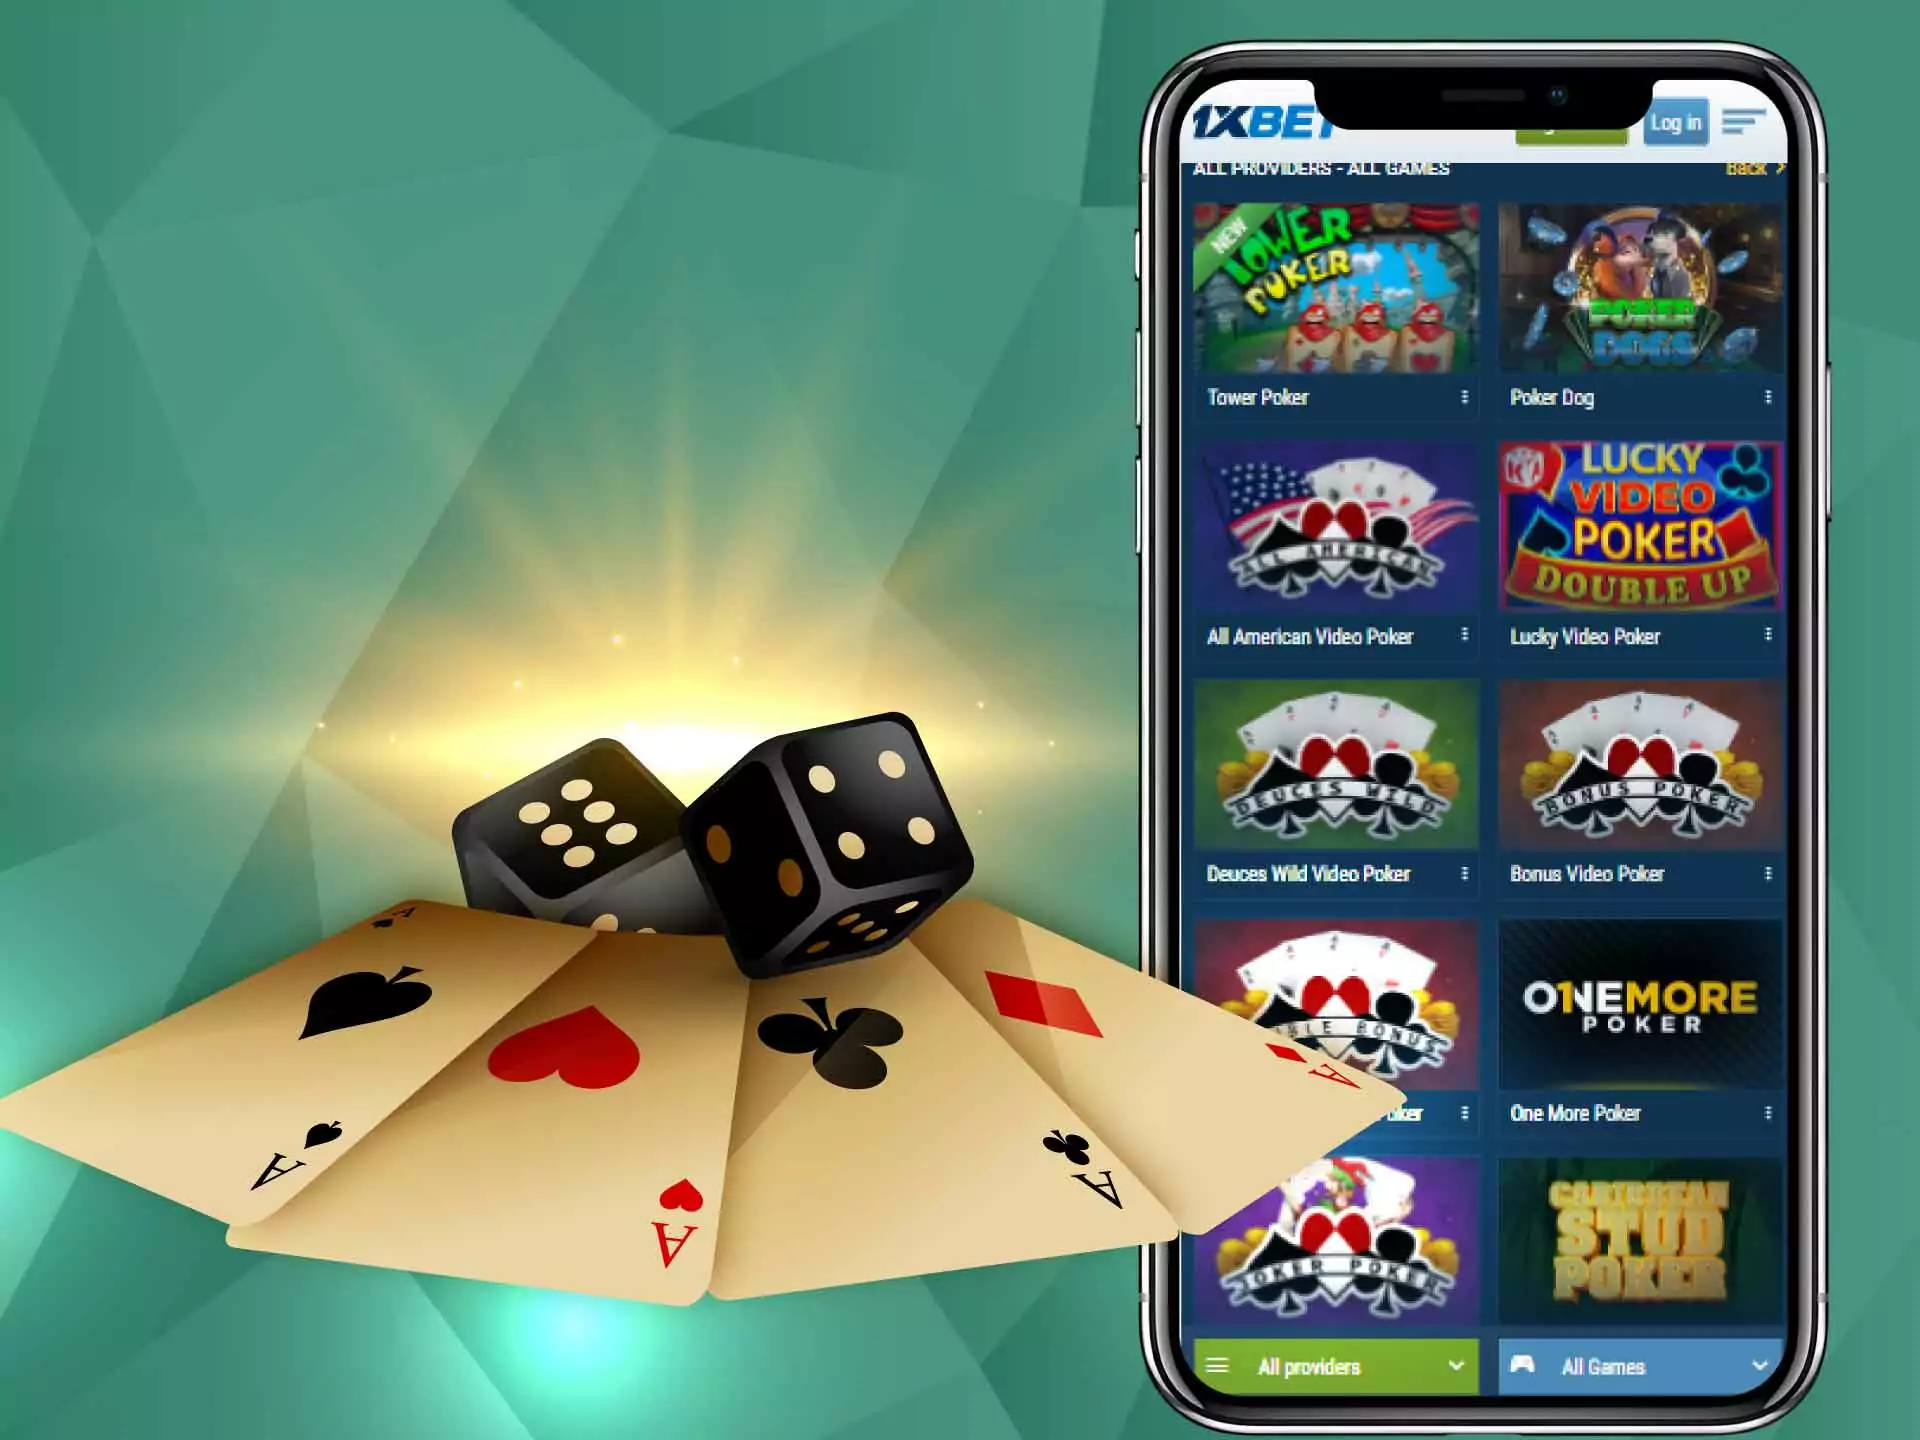 Play different types of poker games at 1xBet.